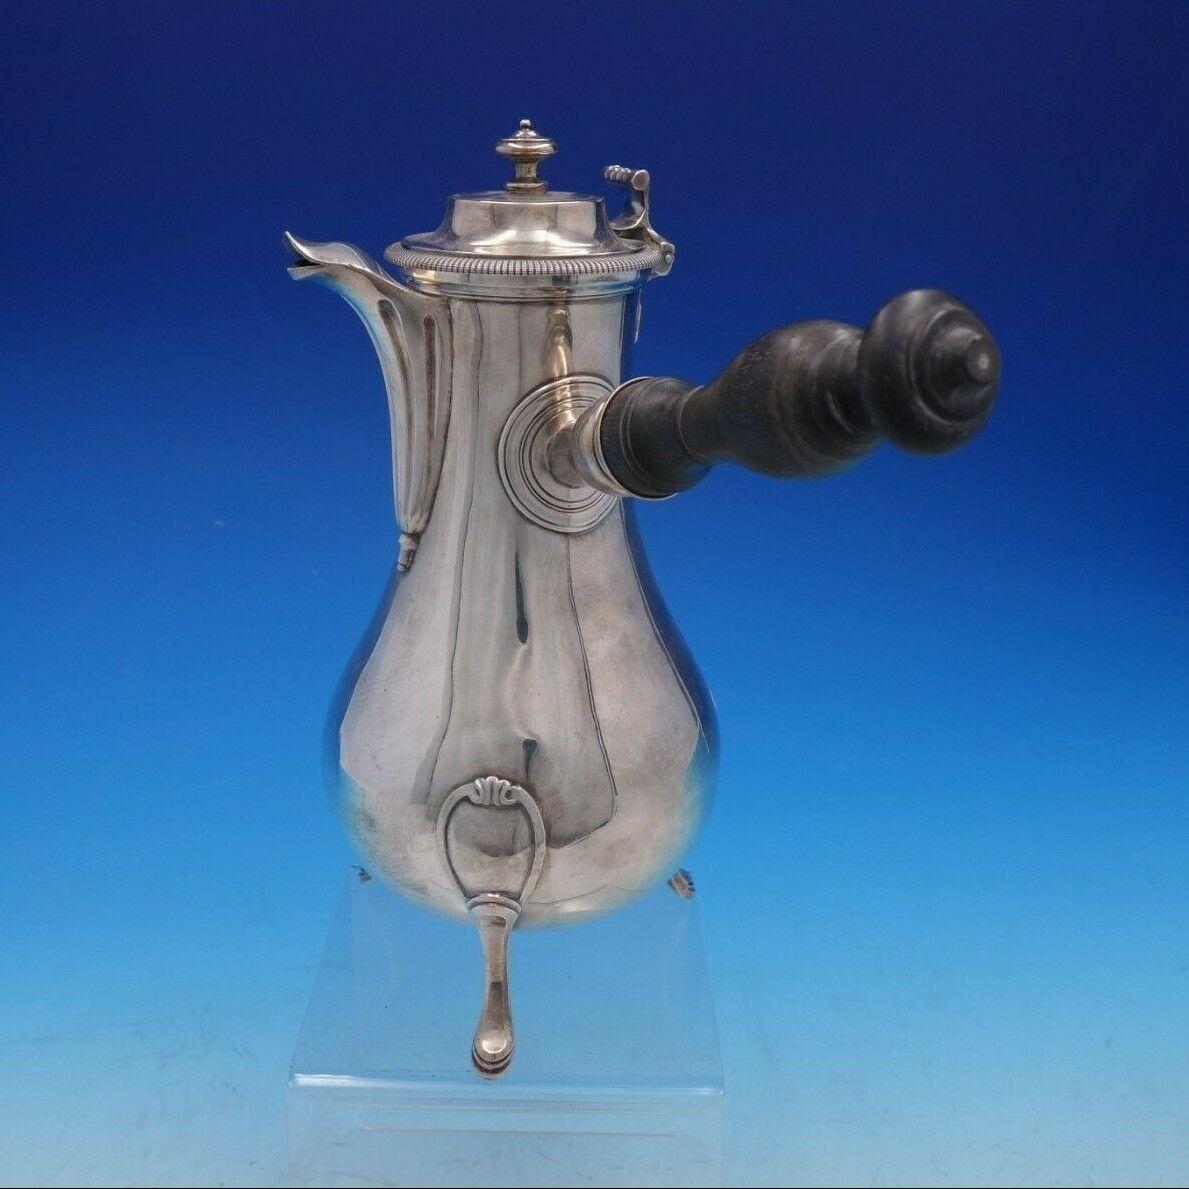 French sterling 

French sterling coffee pot with wood handle, short spout, and 3 applied feet from Paris circa 1781-1789. It measures 10 1/2